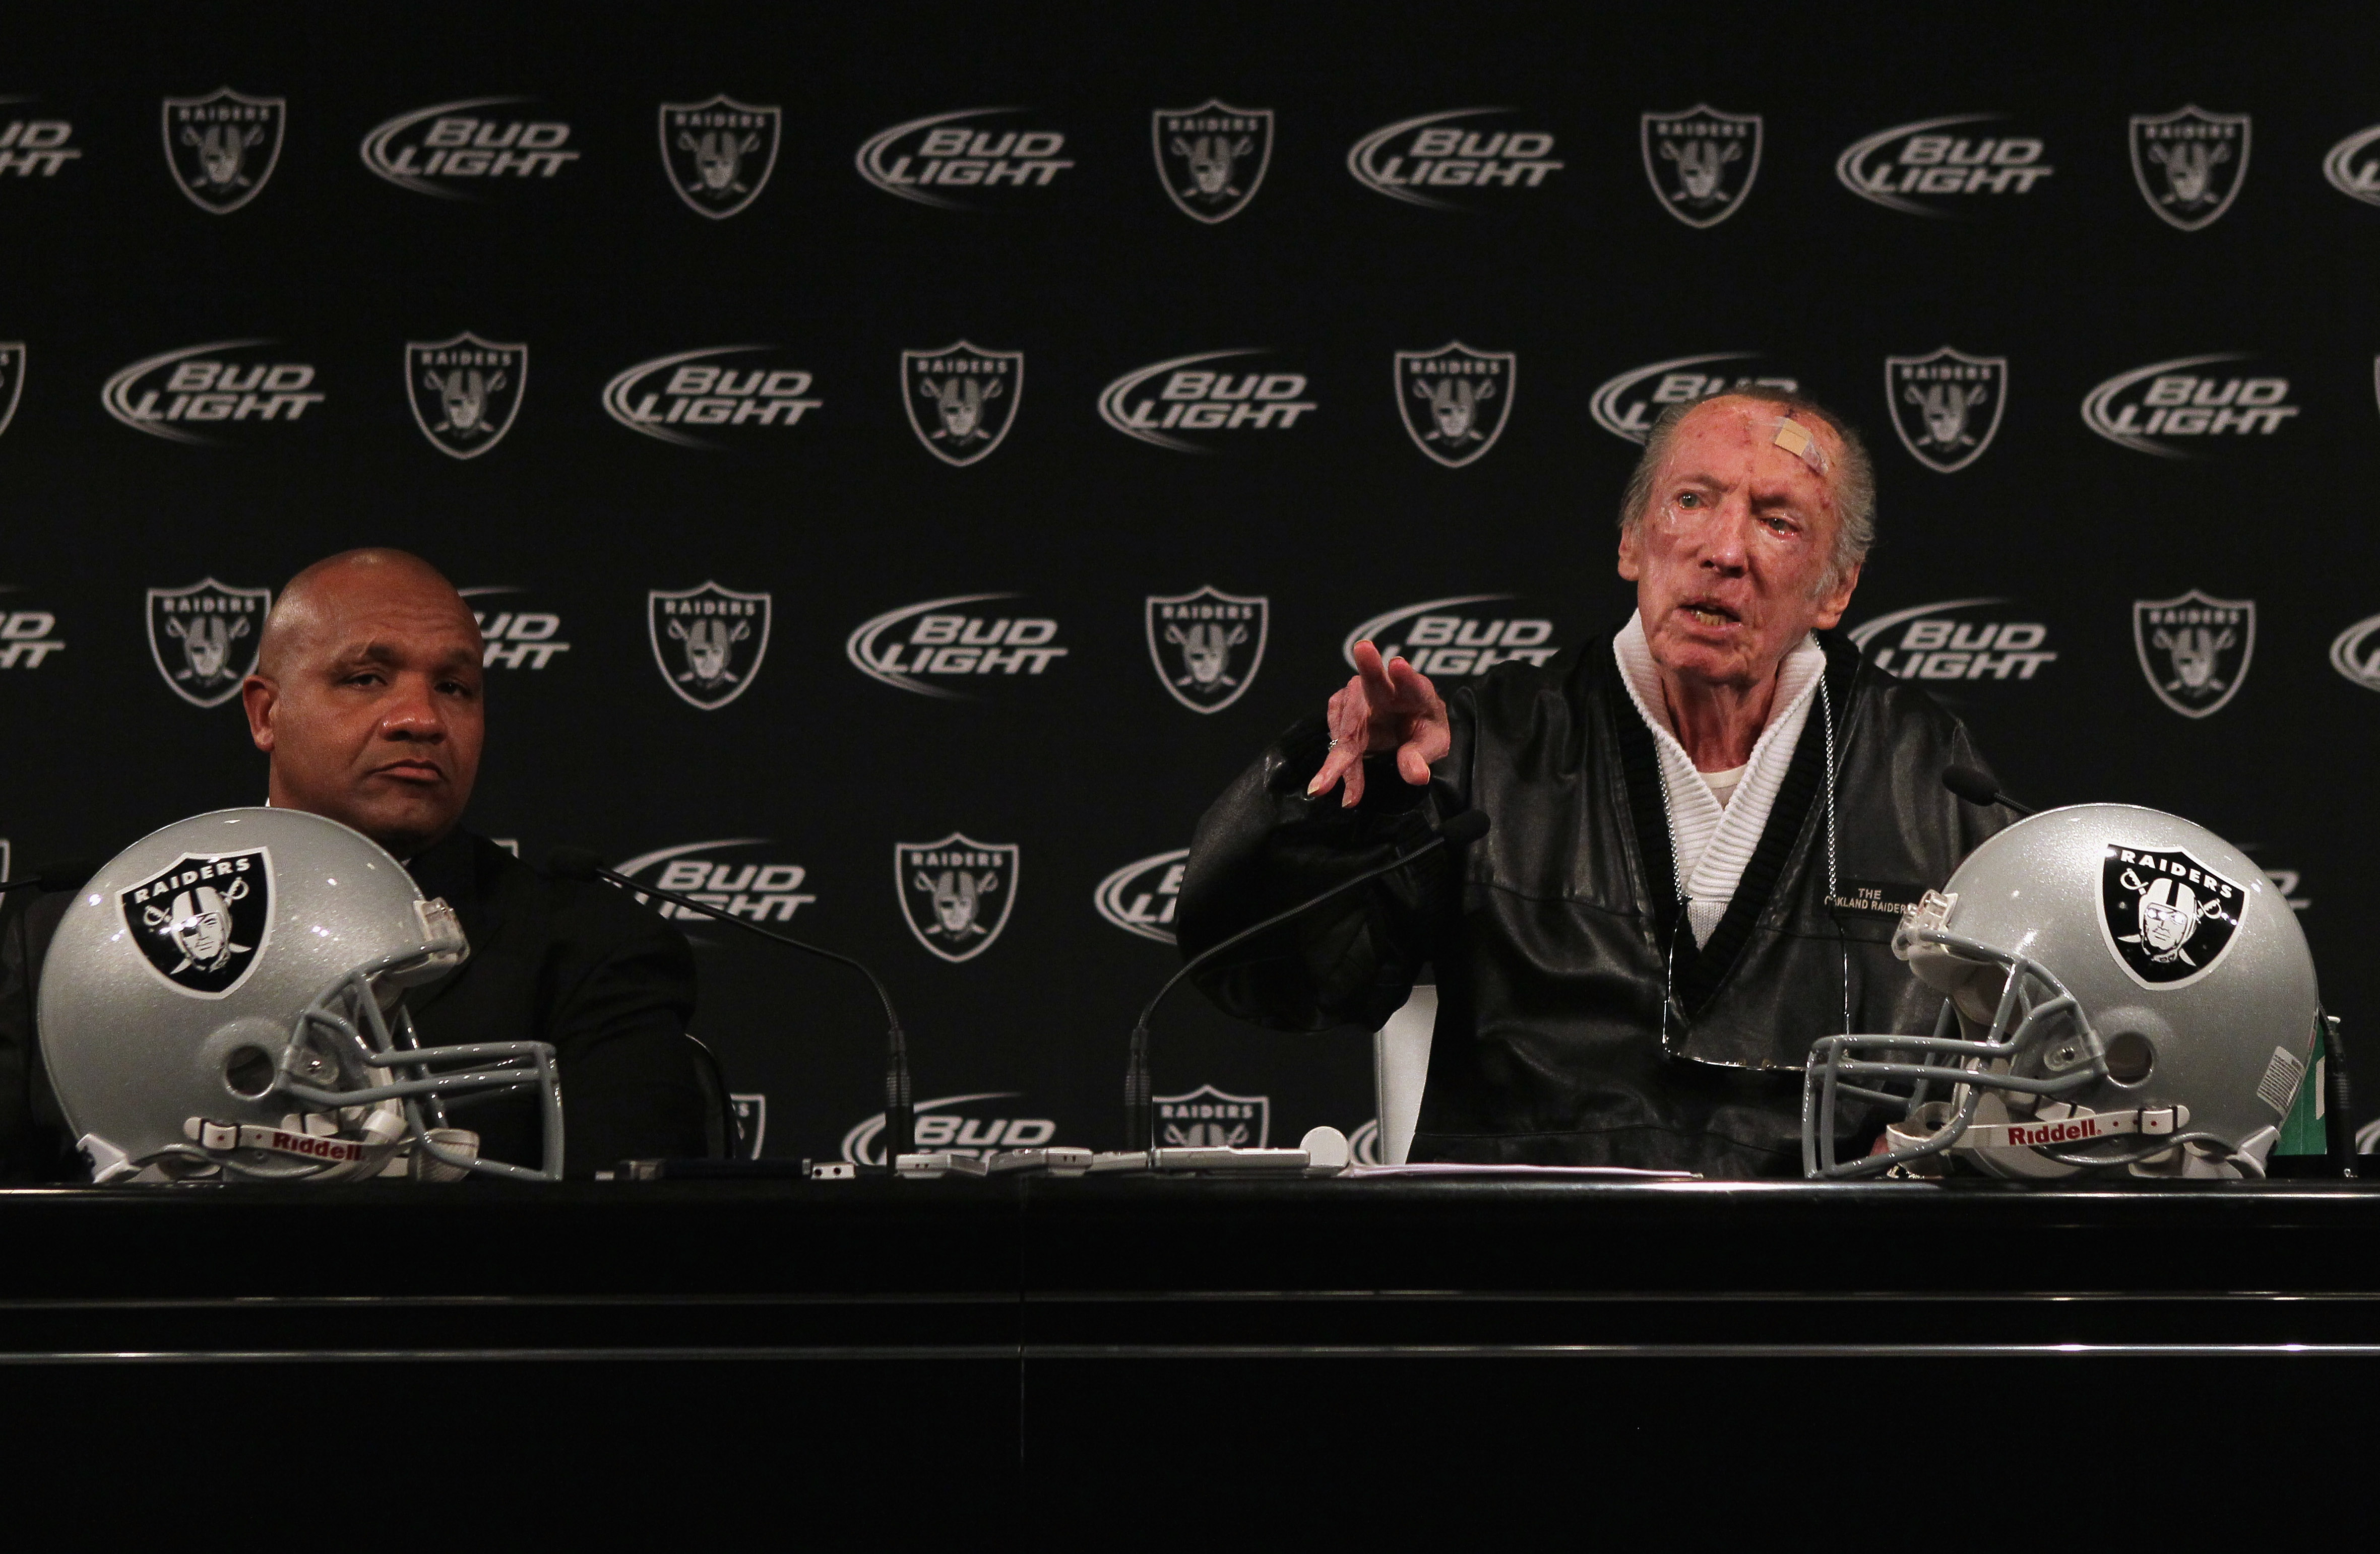 ALAMEDA, CA - JANUARY 18:  New Oakland Raiders coach Hue Jackson (L) looks on as Raiders owner Al Davis speaks during a press conference on January 18, 2011 in Alameda, California. Hue Jackson was introduced as the new coach of the Oakland Raiders, replac